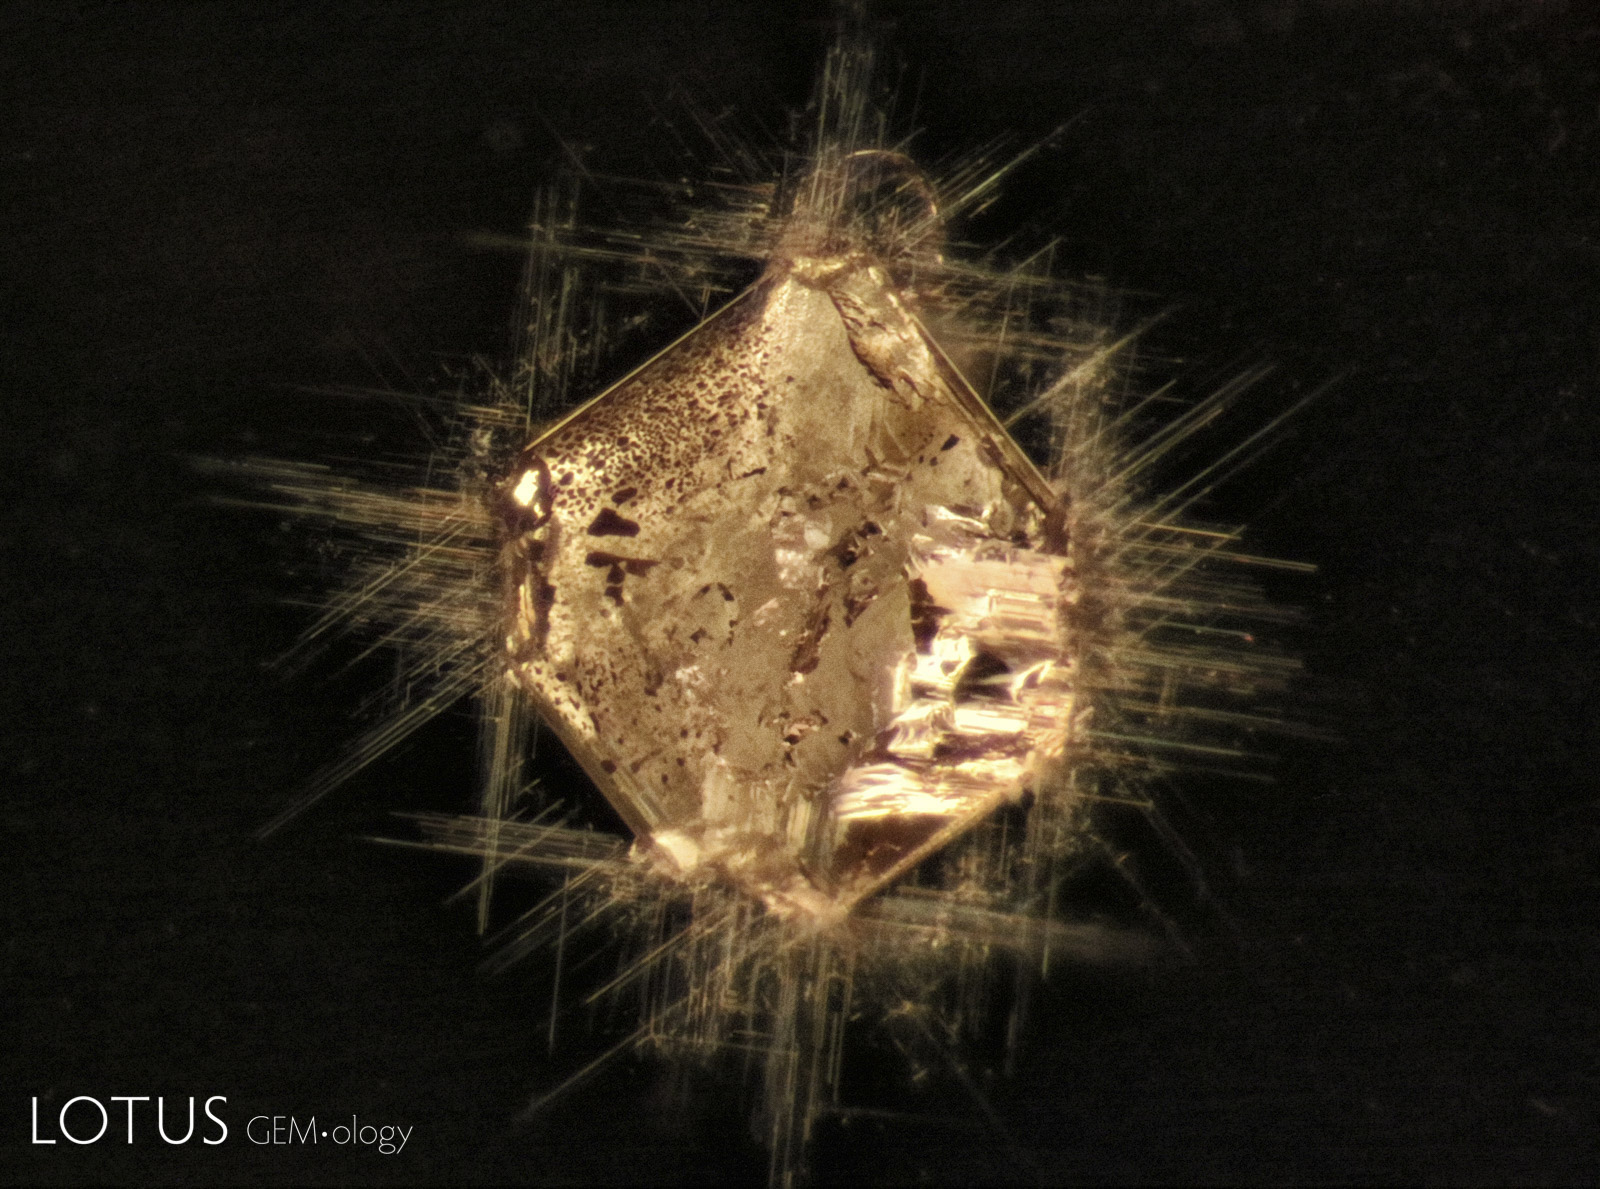 Xenomorphic carbonate (probably dolomite) filling an octahedral negative crystal with oriented needles at the corners. The needles might be either mineral matter or acicular voids. Spinel host from Burma (Myanmar). 200X.